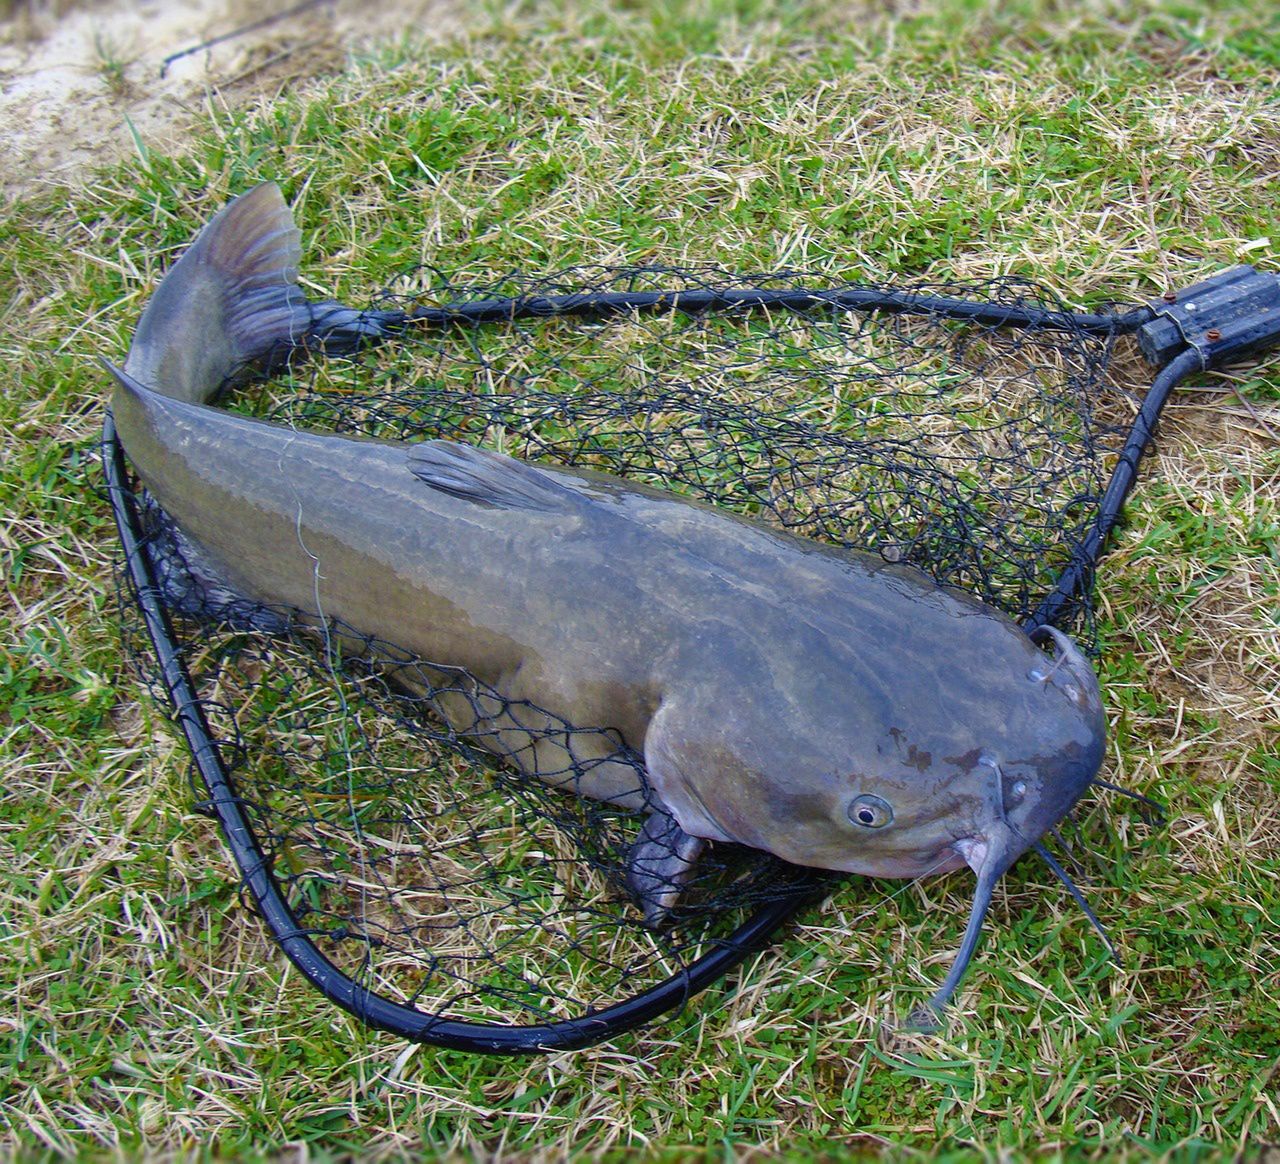 The wels catfish is the largest freshwater fish in Europe.